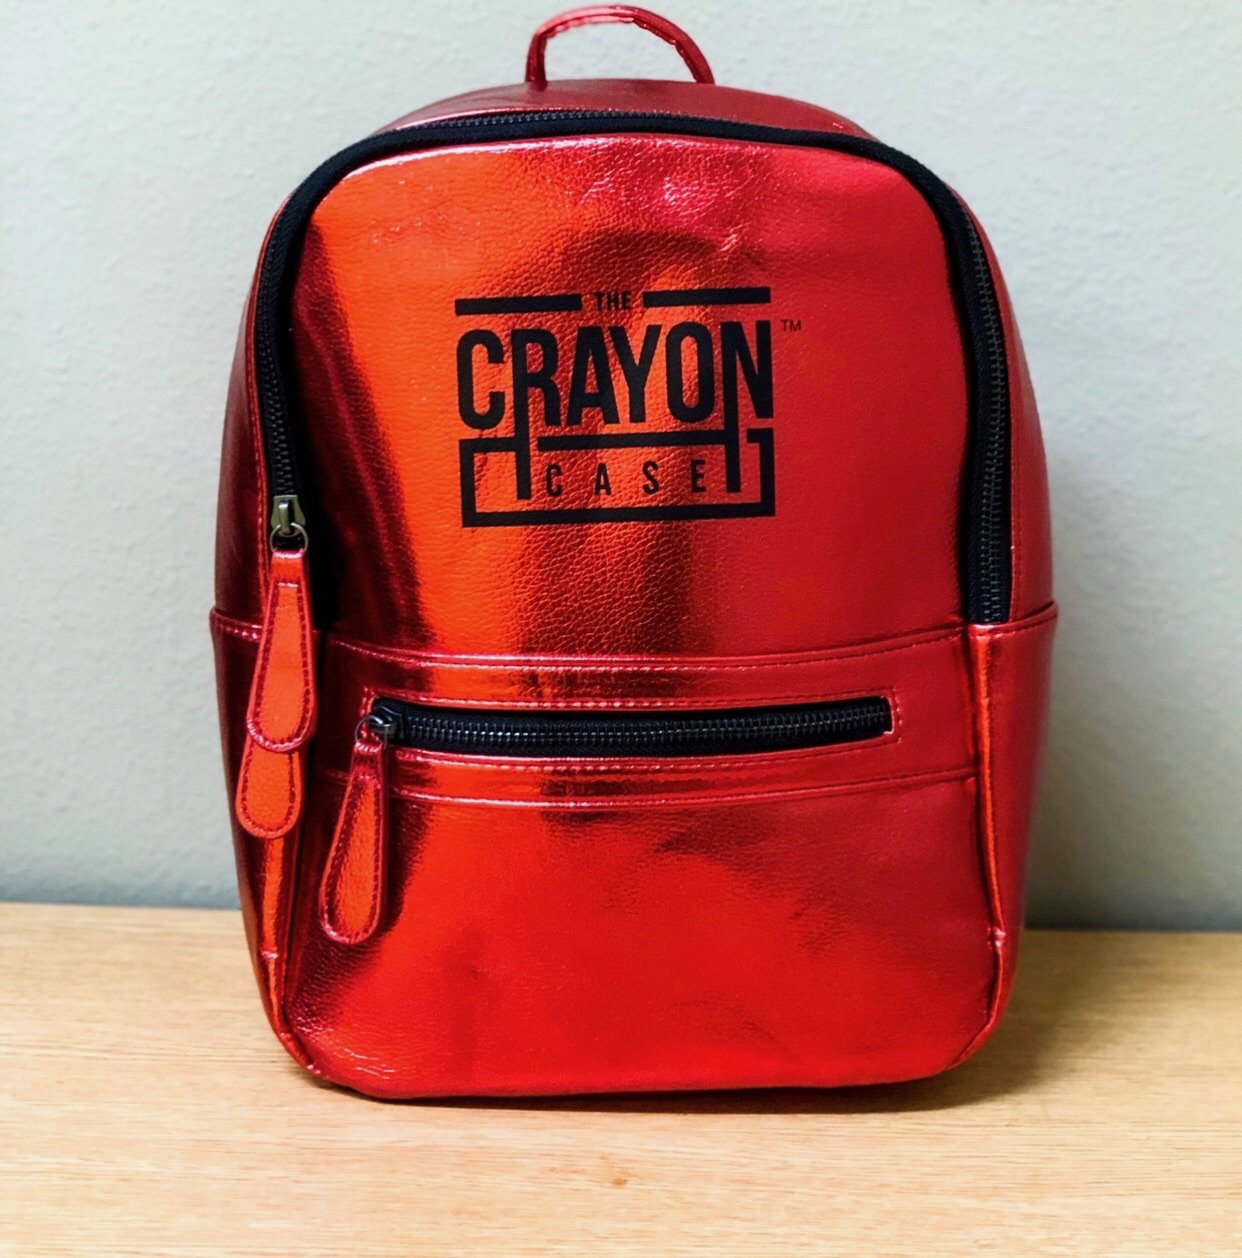 Mini Backpack Keychain by THE CRAYON CASE